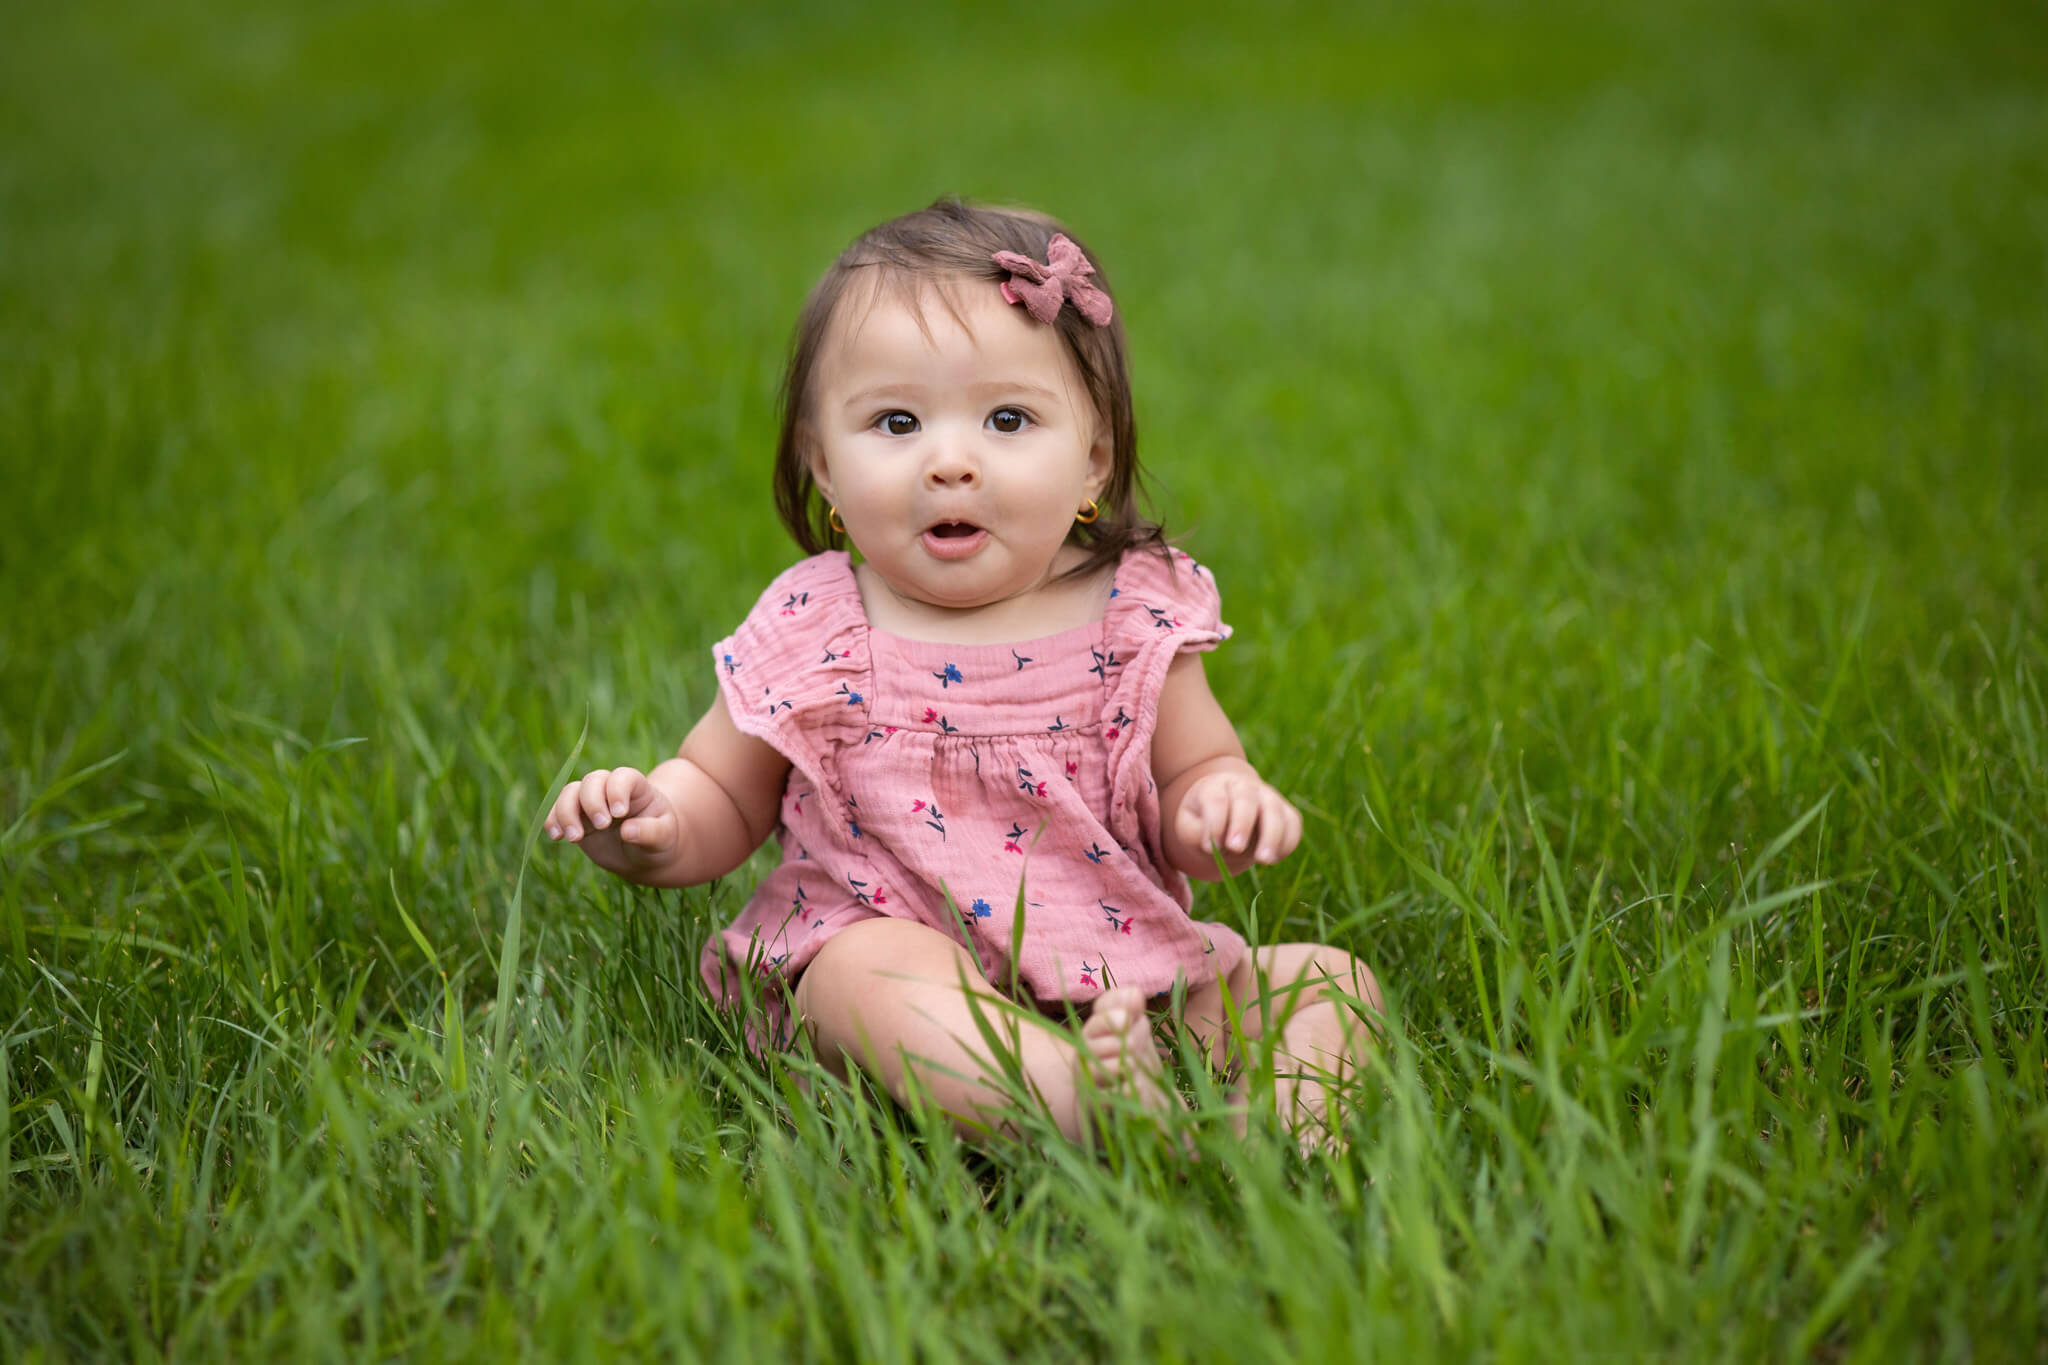 6 months old dark haired little girl sitting in a green grassy field in Beulah, CO